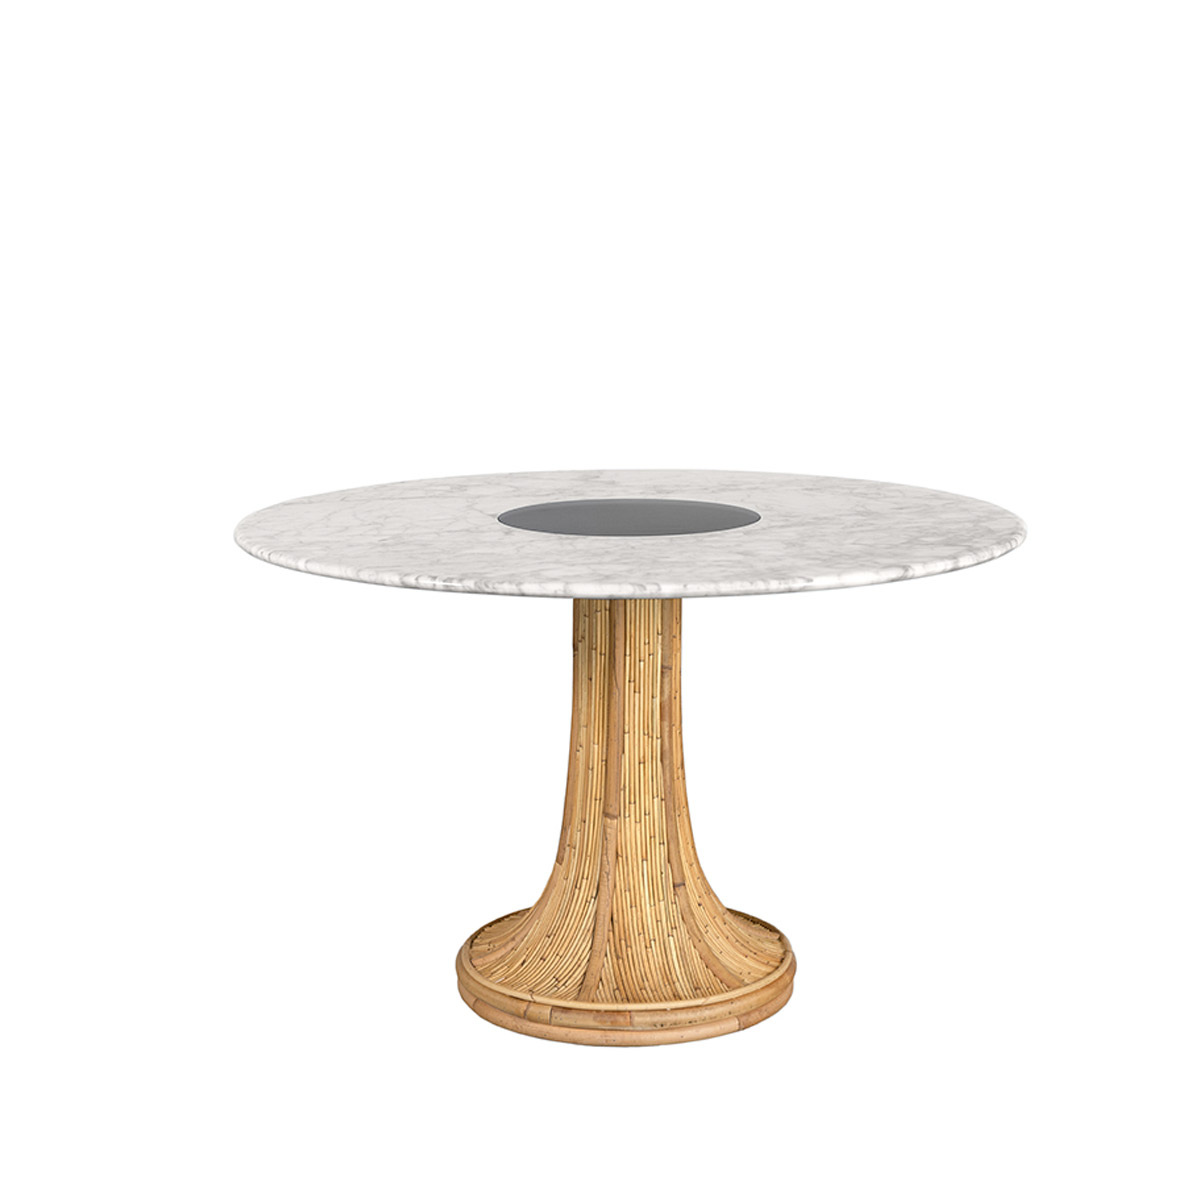 Round Dining Table Riviera, White / Natural - ø120 x H74 cm - Carrara marble / Rattan - image 1